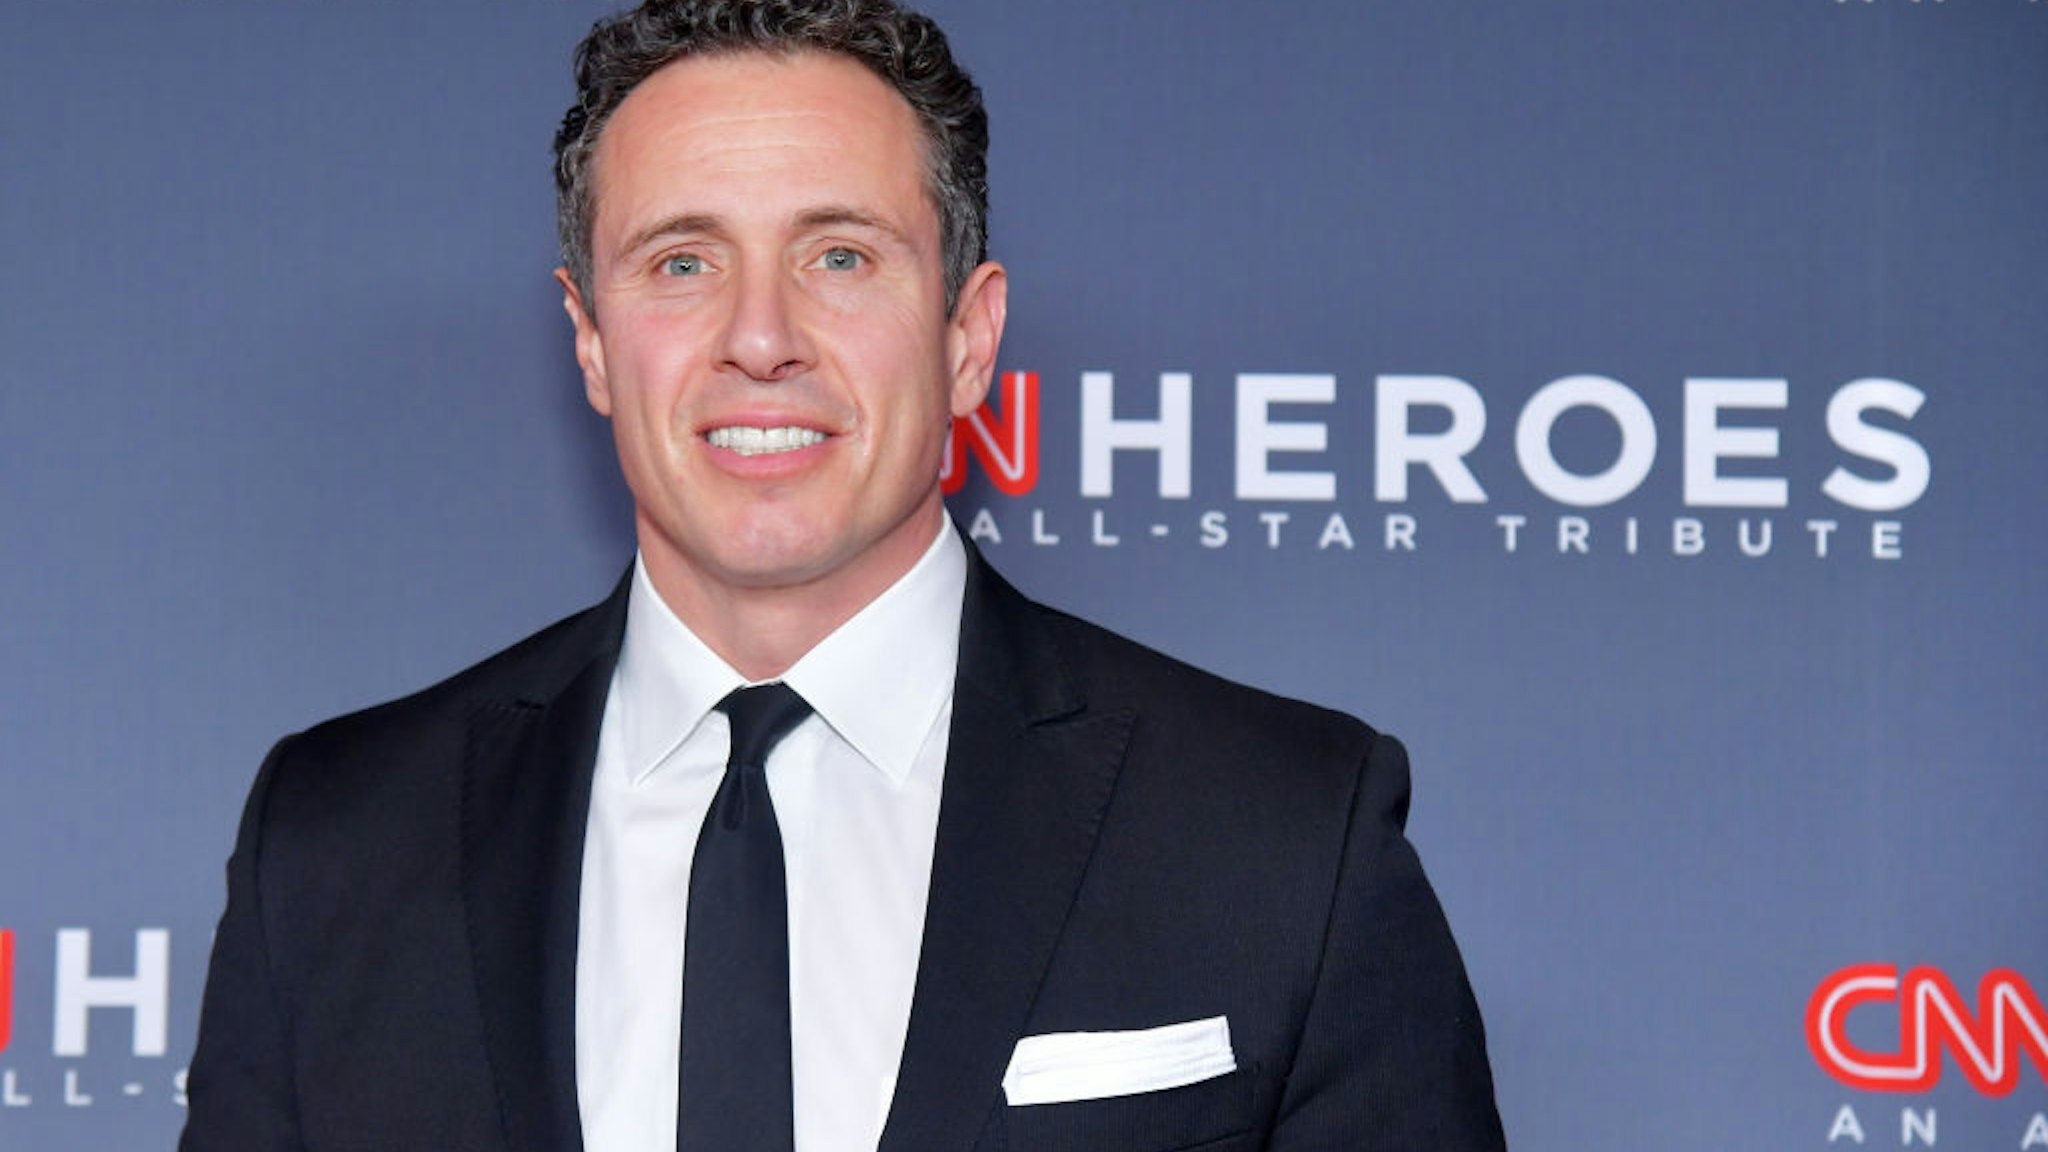 Chris Cuomo attends the 12th Annual CNN Heroes: An All-Star Tribute at American Museum of Natural History on December 9, 2018 in New York City. (Photo by Michael Loccisano/Getty Images for CNN )